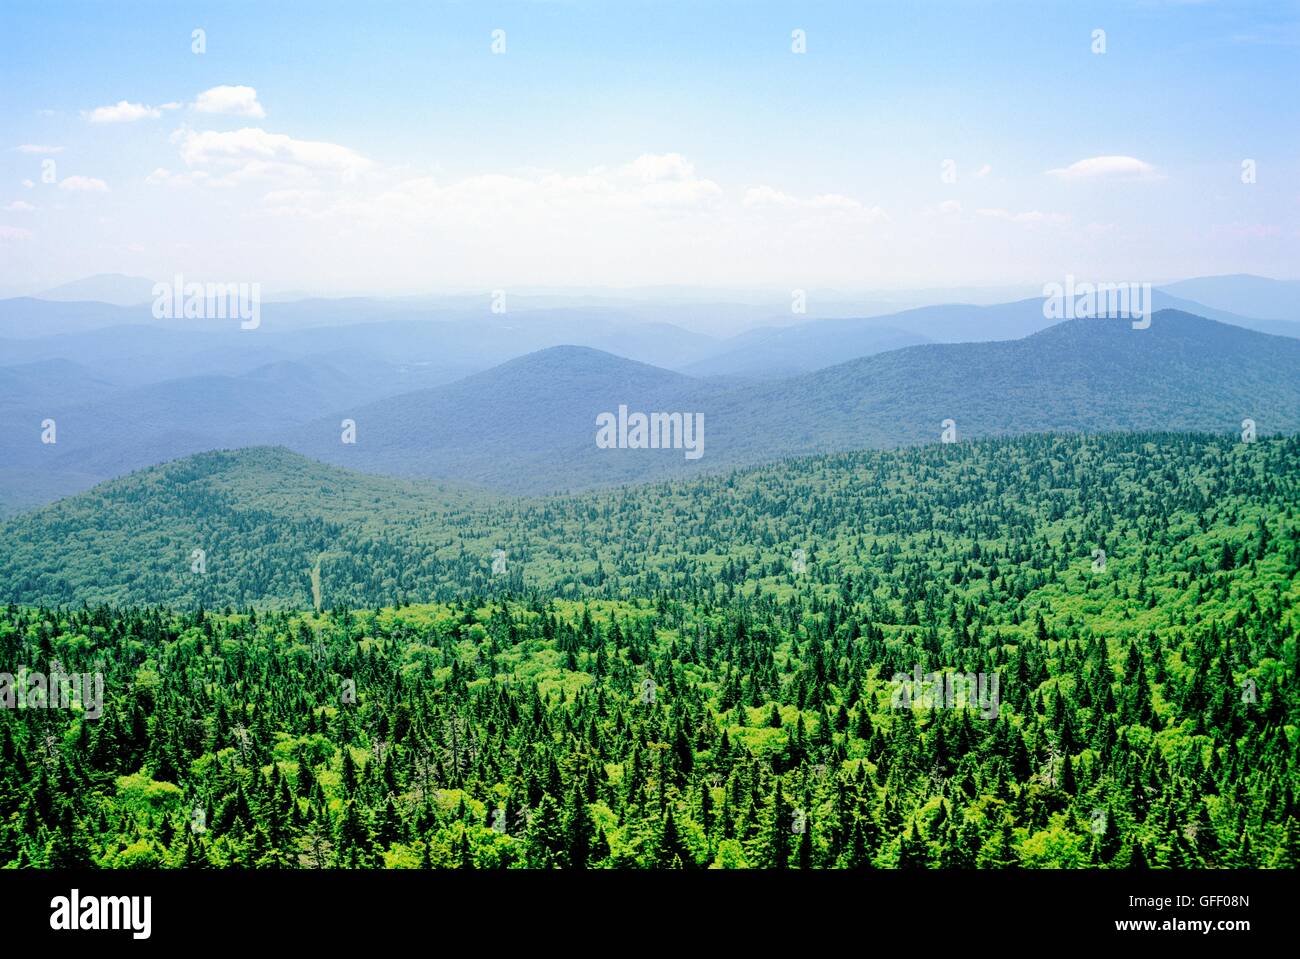 Mountain range conifer forests seen from top of Killington Mountain, Vermont, New England, USA Stock Photo